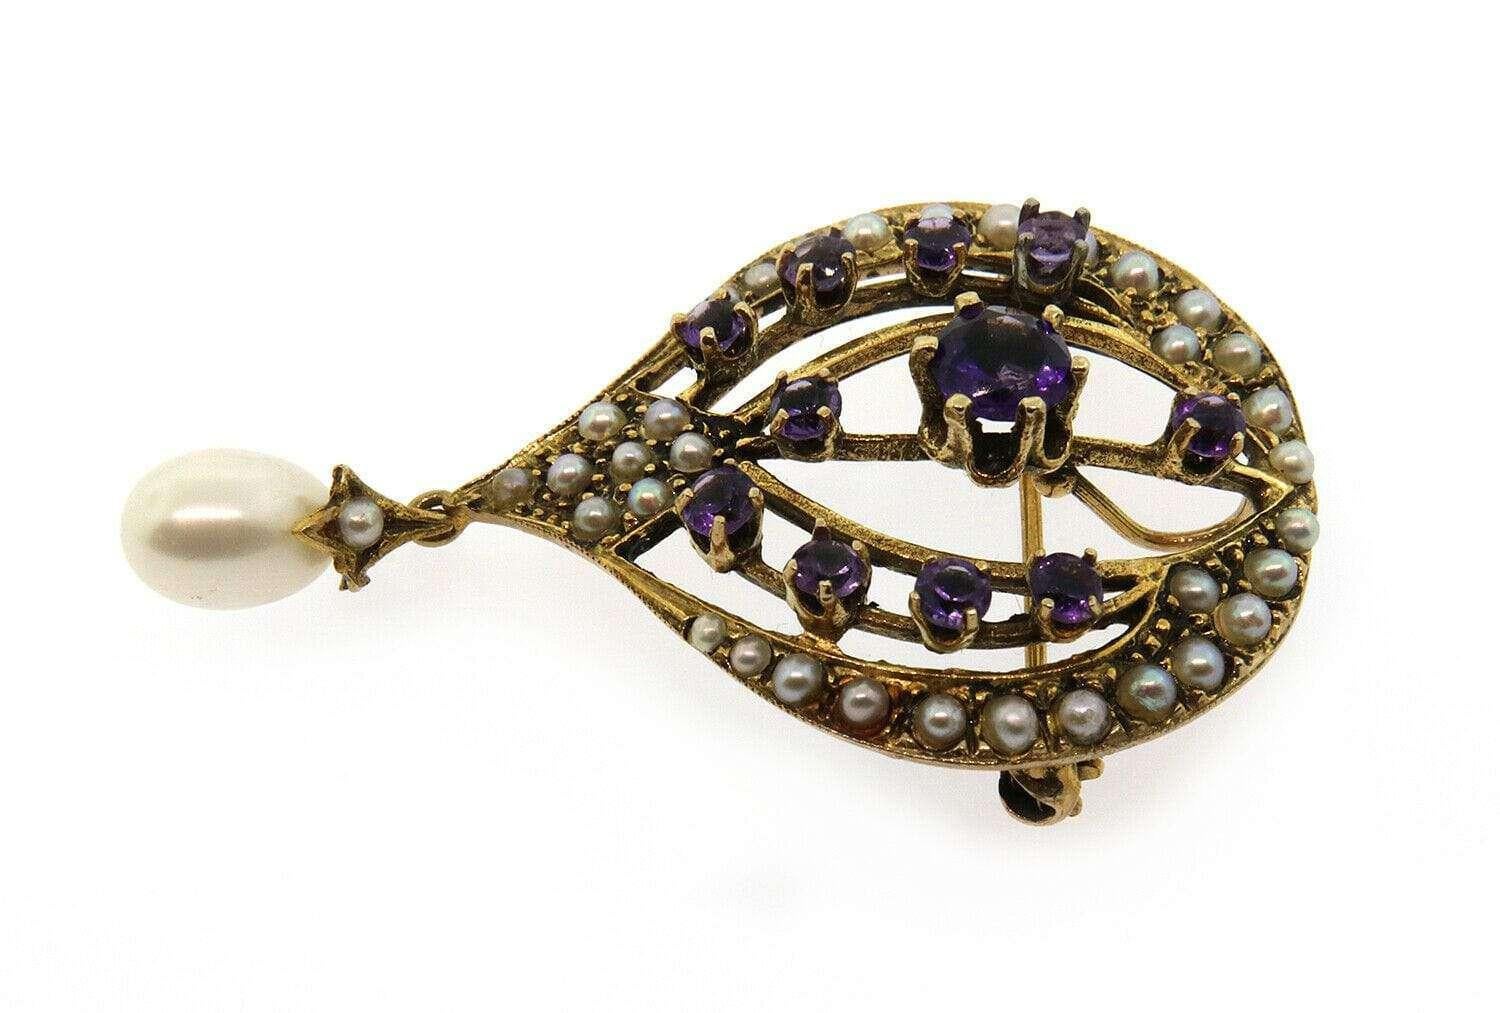 Fabulous Vintage Pearl and Amethyst Convertible Brooch/Pendant in 14K

Vintage Pearl & Amethyst Brooch
14K Yellow Gold
White Pearls
Amethysts
Brooch Size: 1 1/8 X 1 3/4 Inch with Dangle
Total Weight: approx. 6.6 Grams
Stamped: 14K

Offered for your